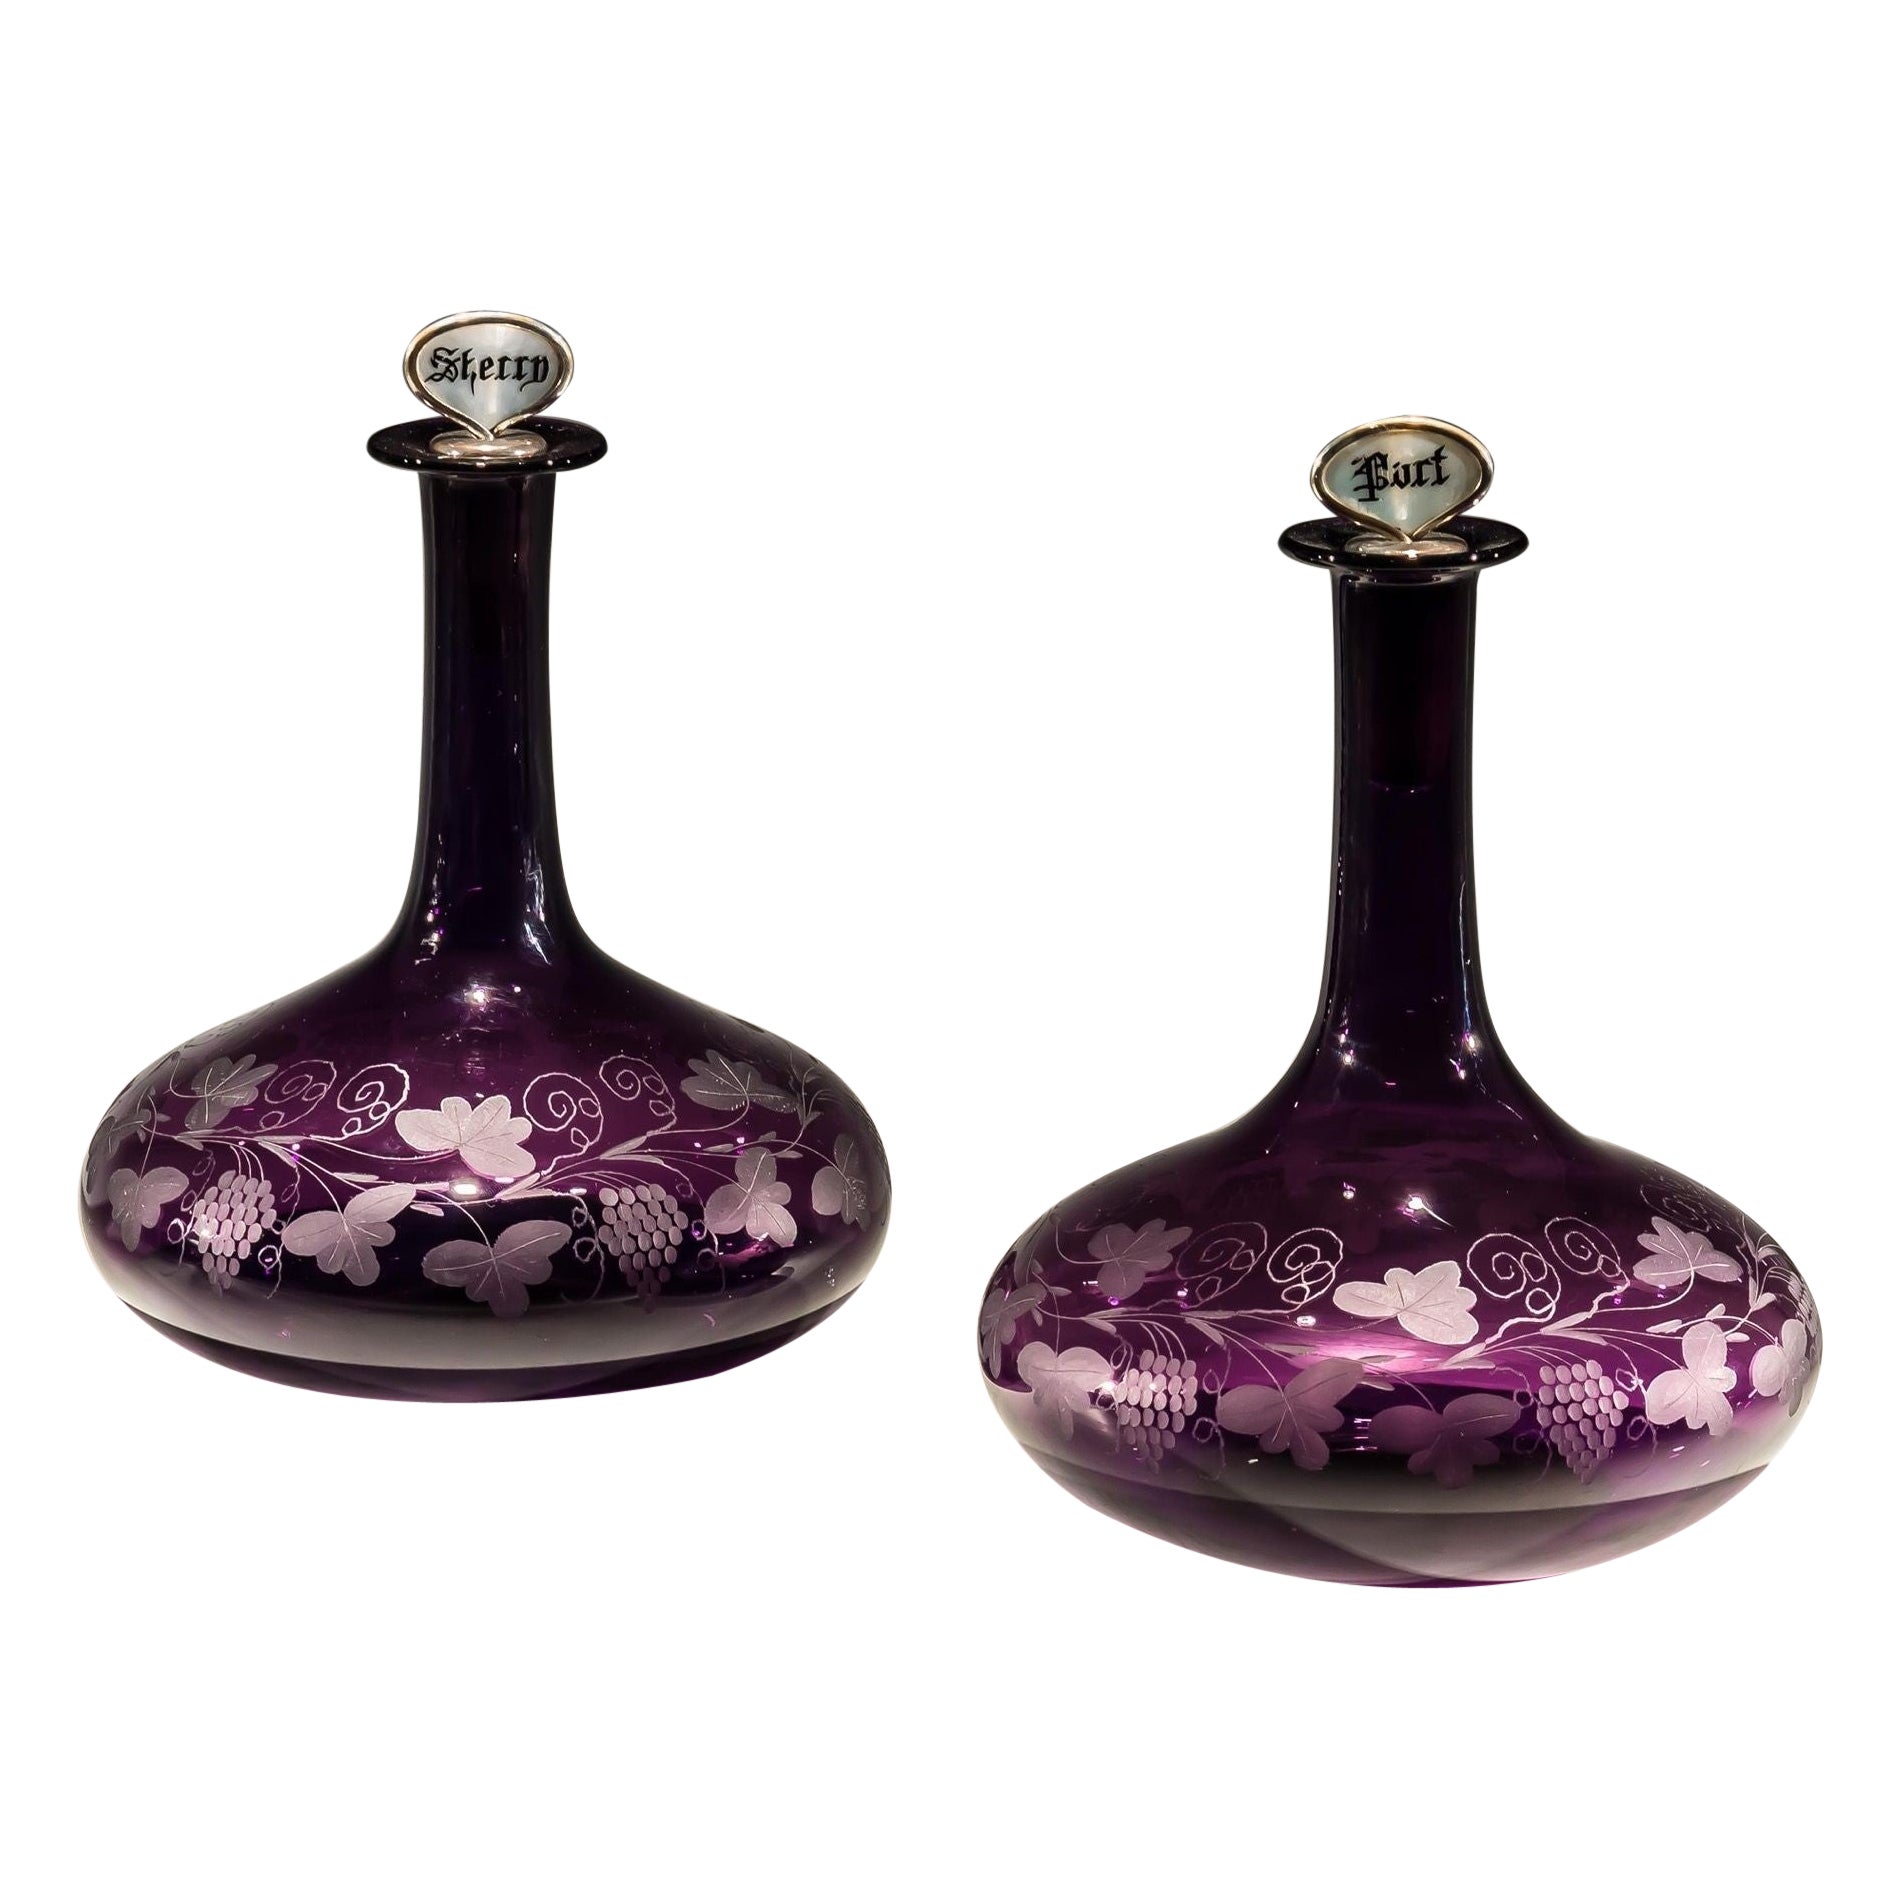 A Fine Pair Amethyst Port & Sherry Decanters For Sale